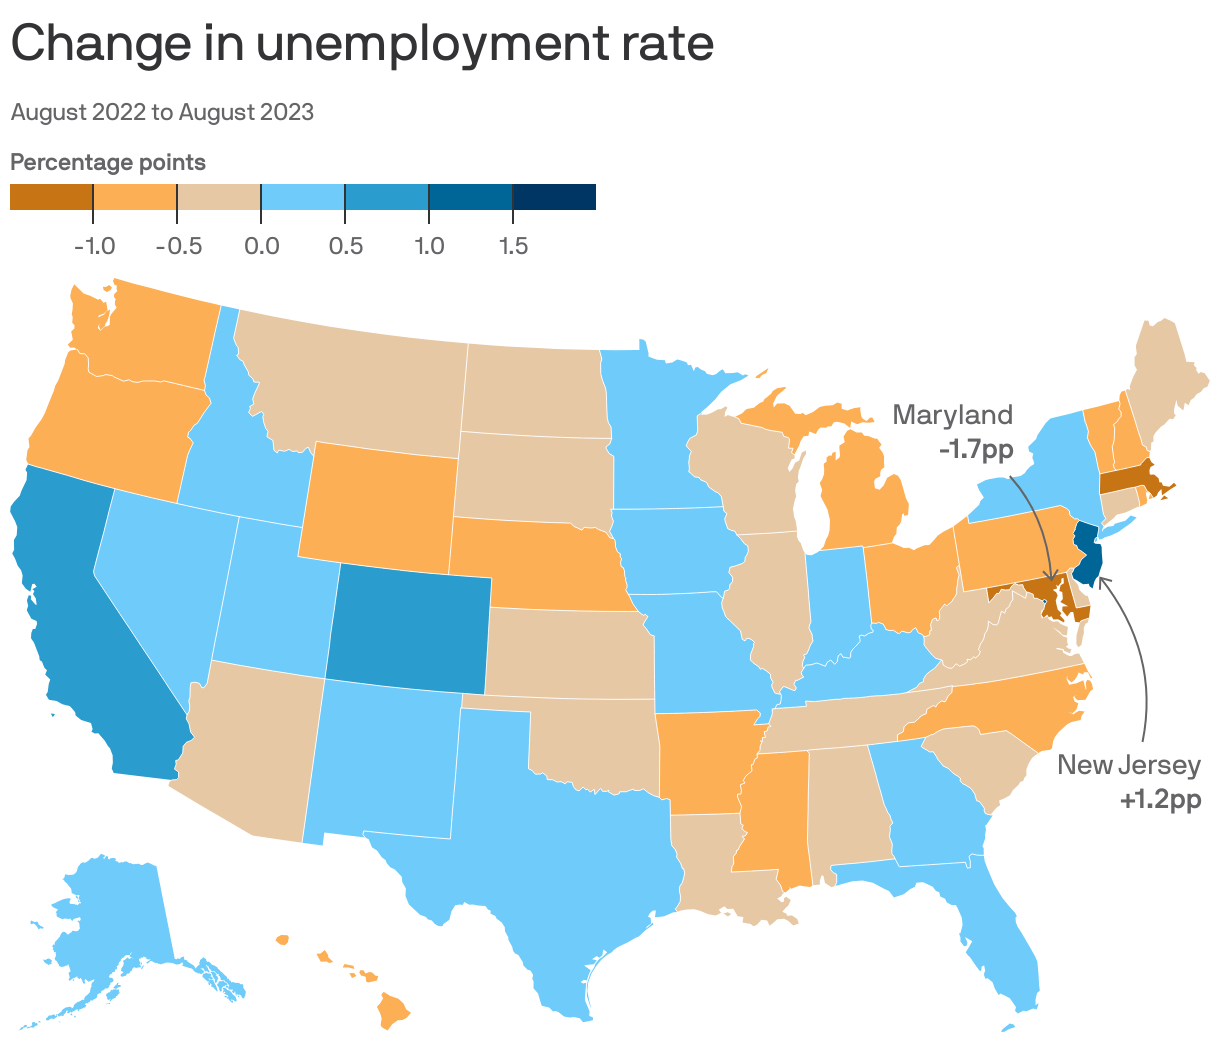 Change in unemployment rate